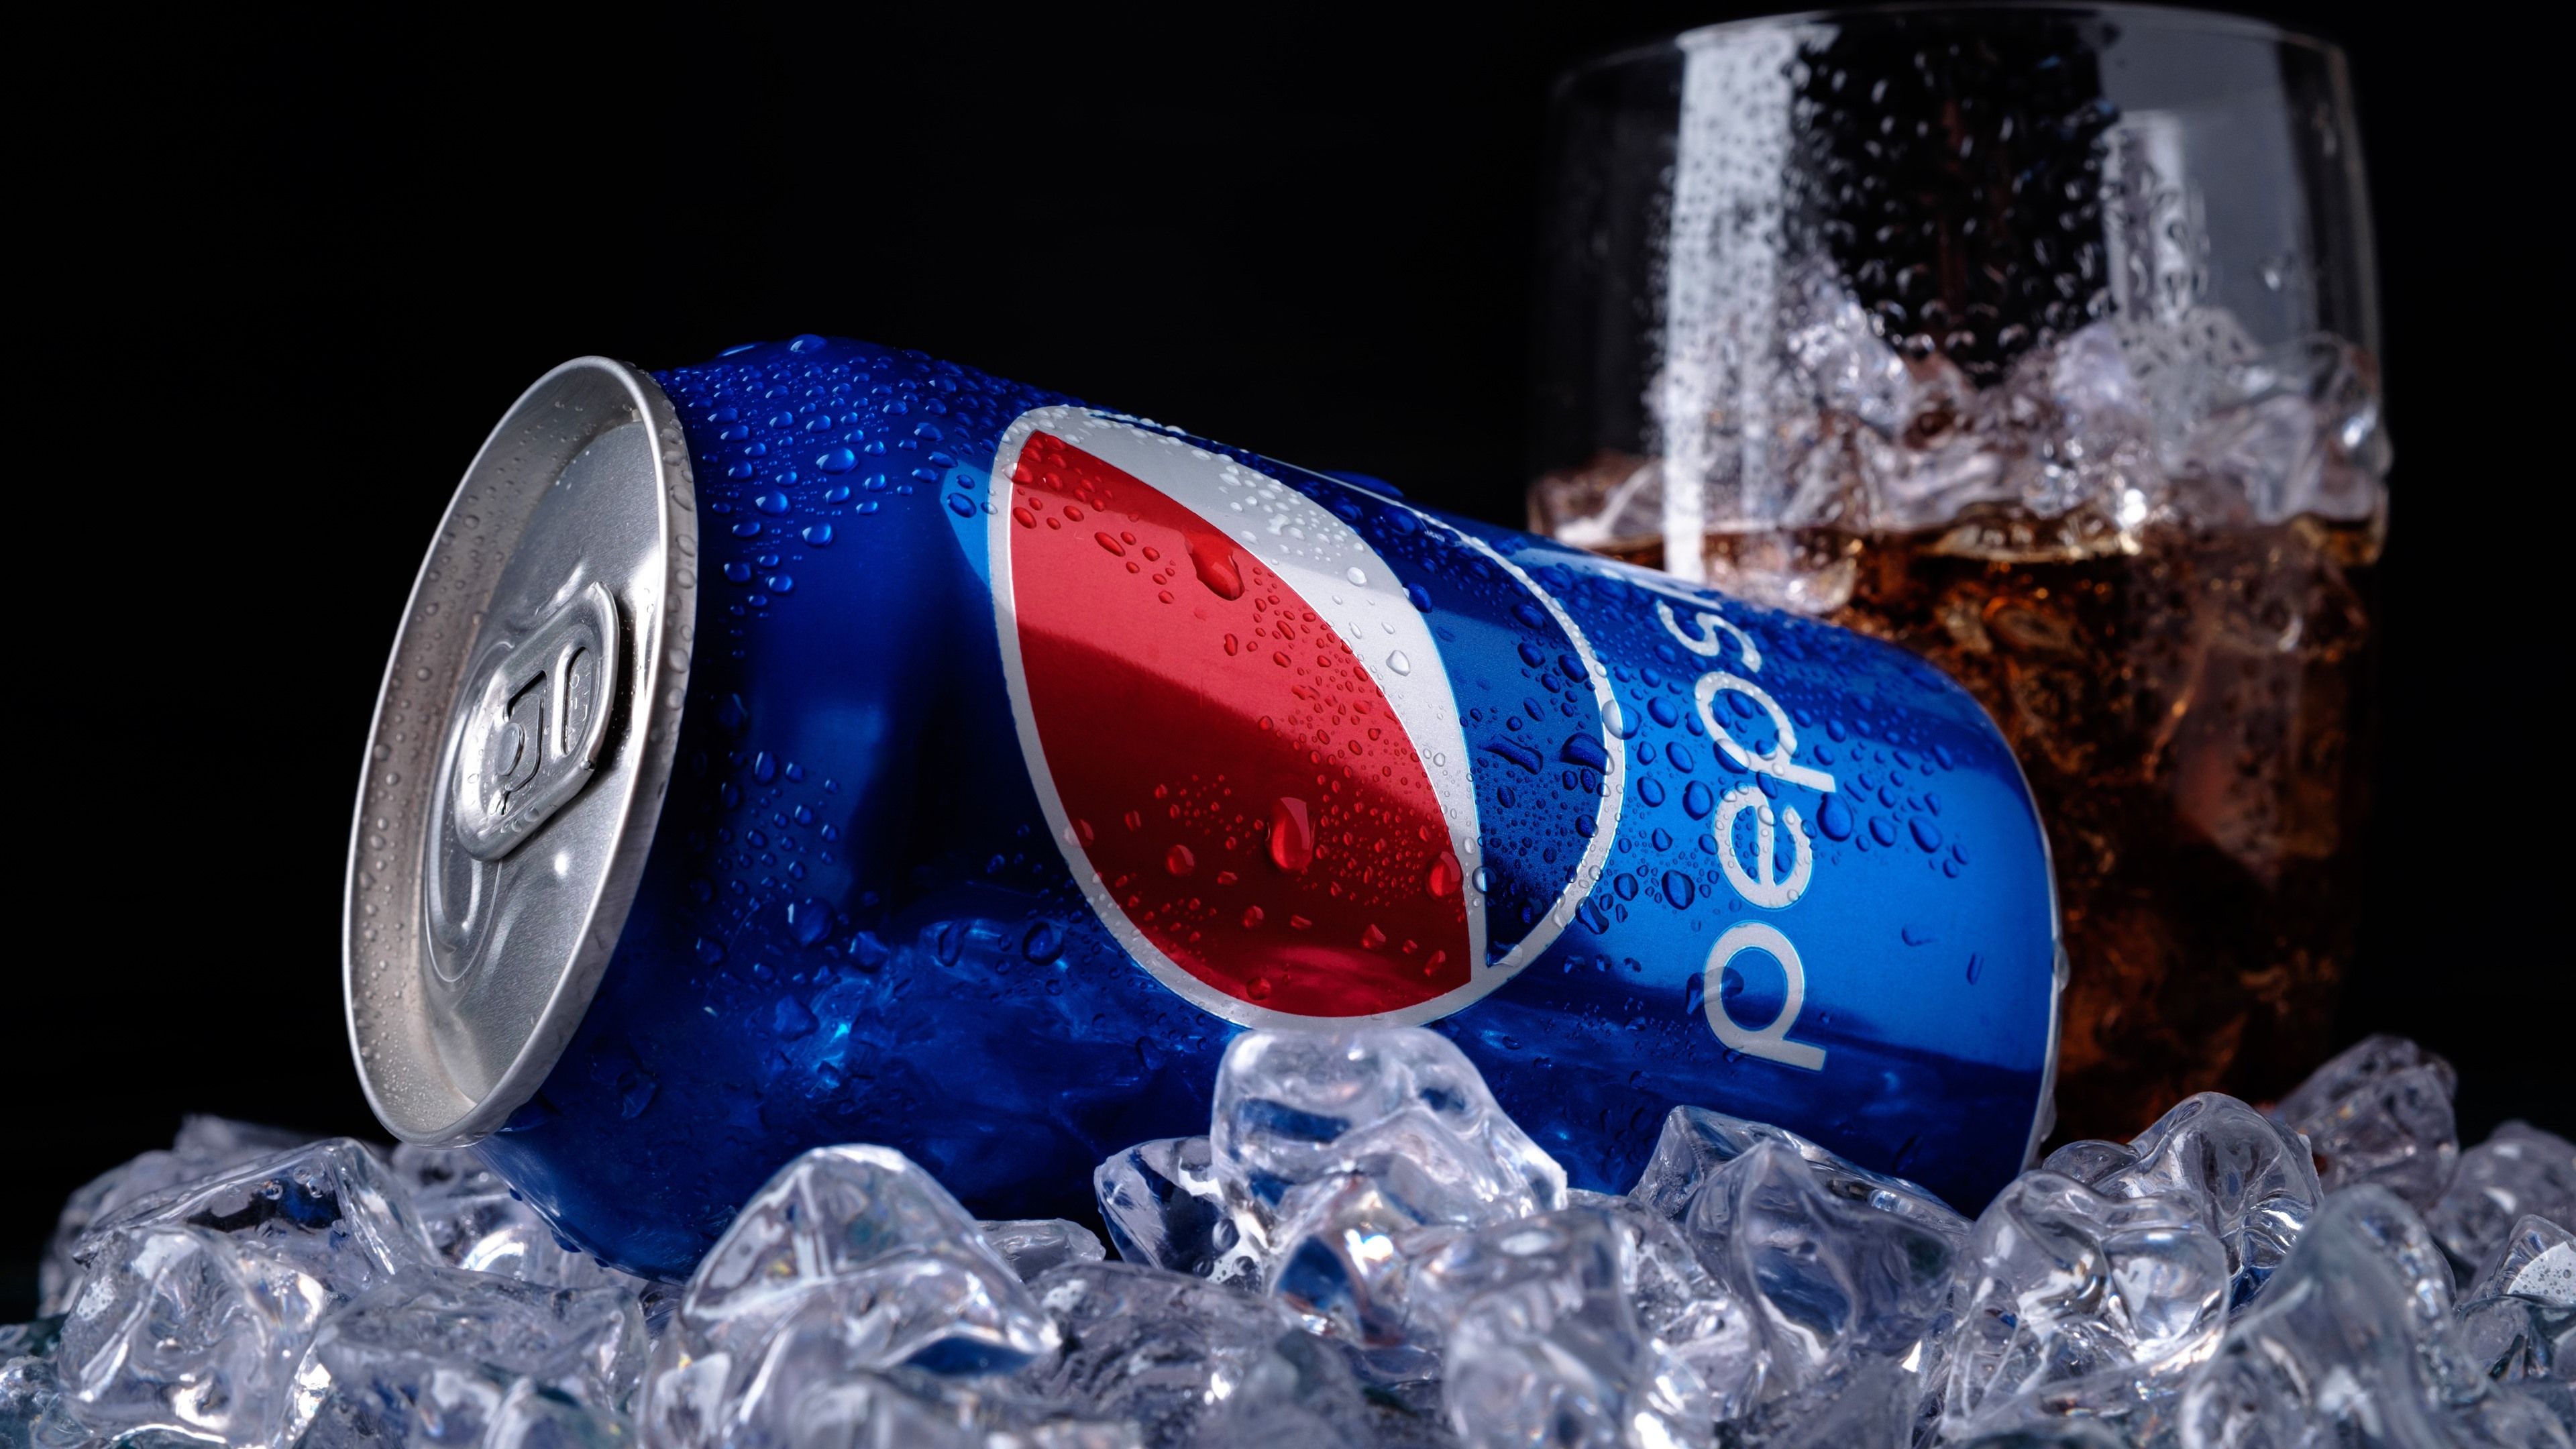 Wallpaper Pepsi cola, ice cubes, drinks 3840x2160 UHD 4K Picture, Image